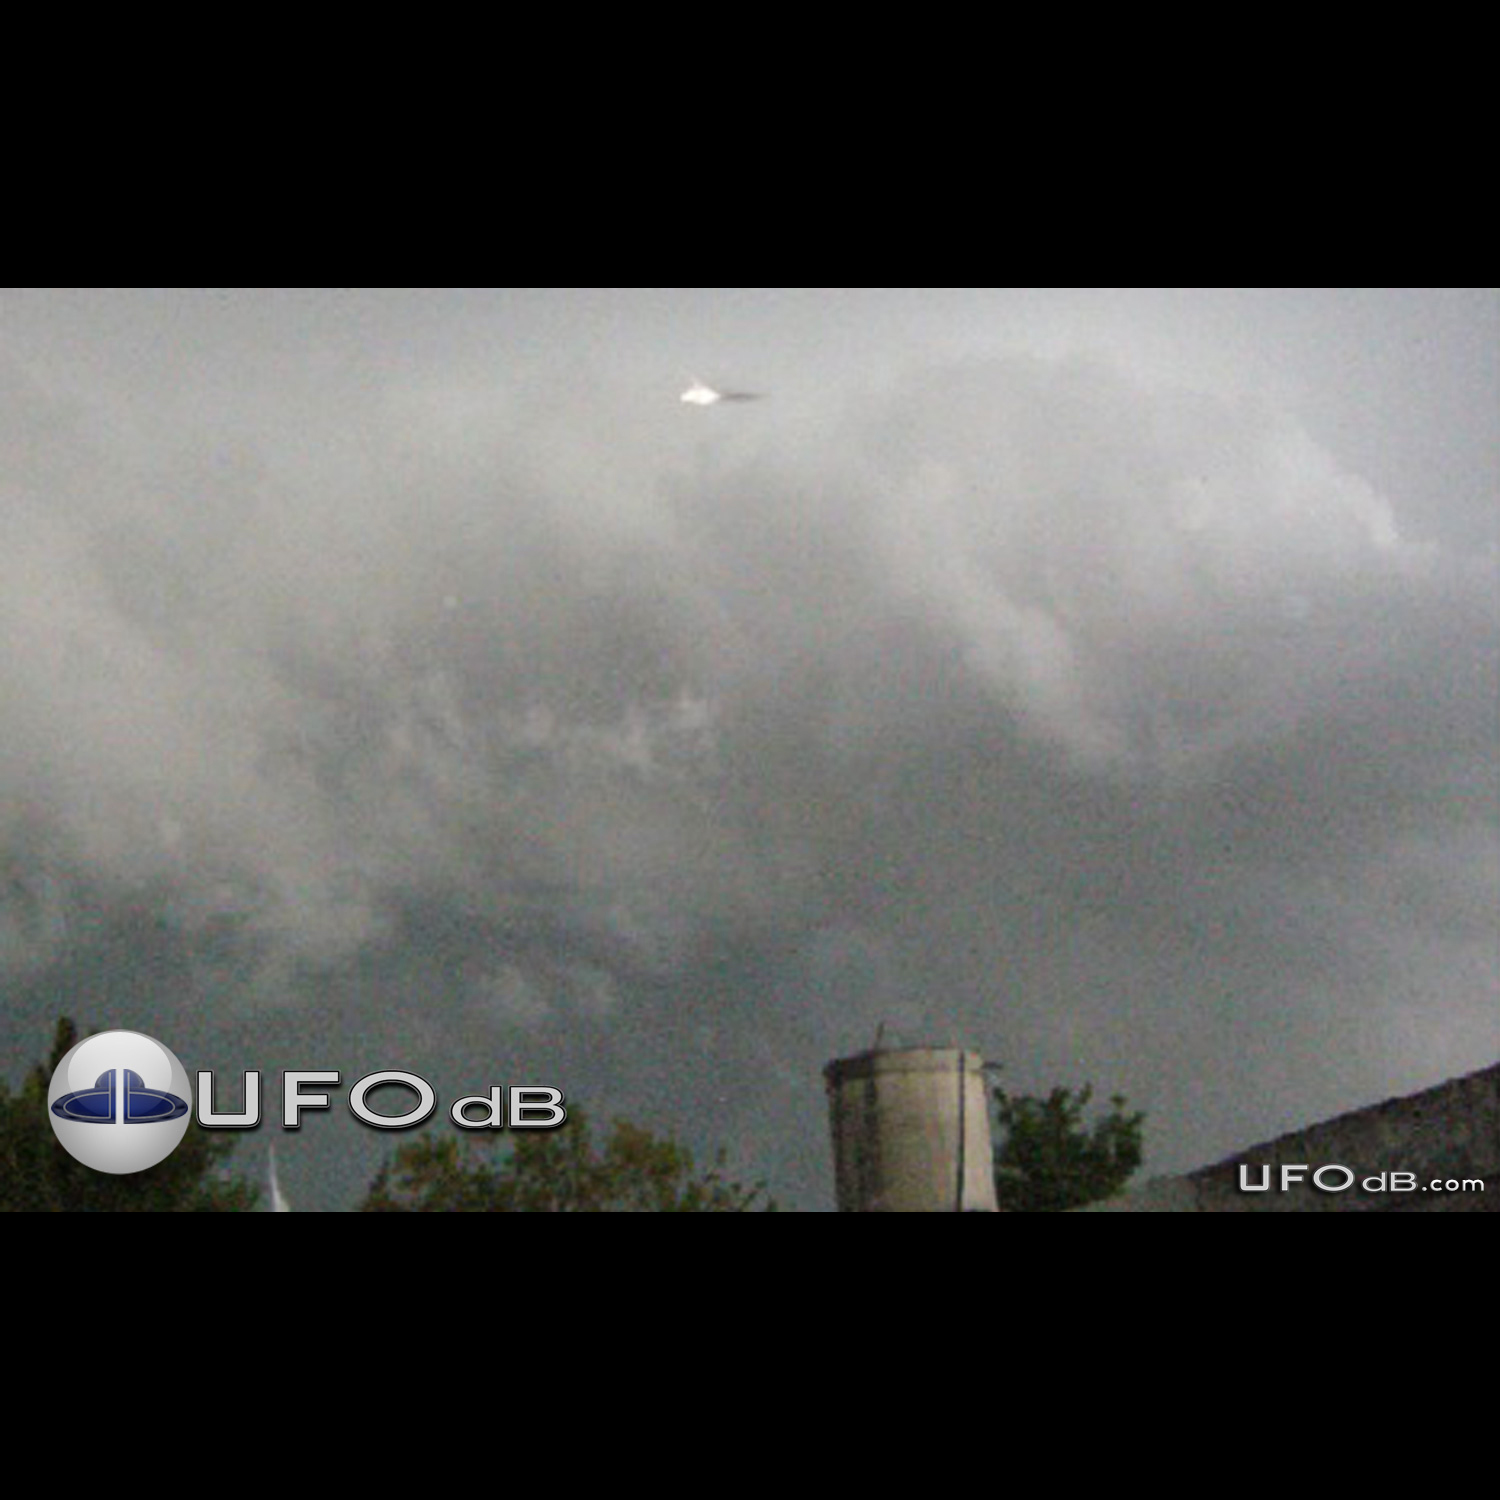 Rosario City Web Site display a UFO in stormy clouds | Argentina 2011 UFO Picture #259-1